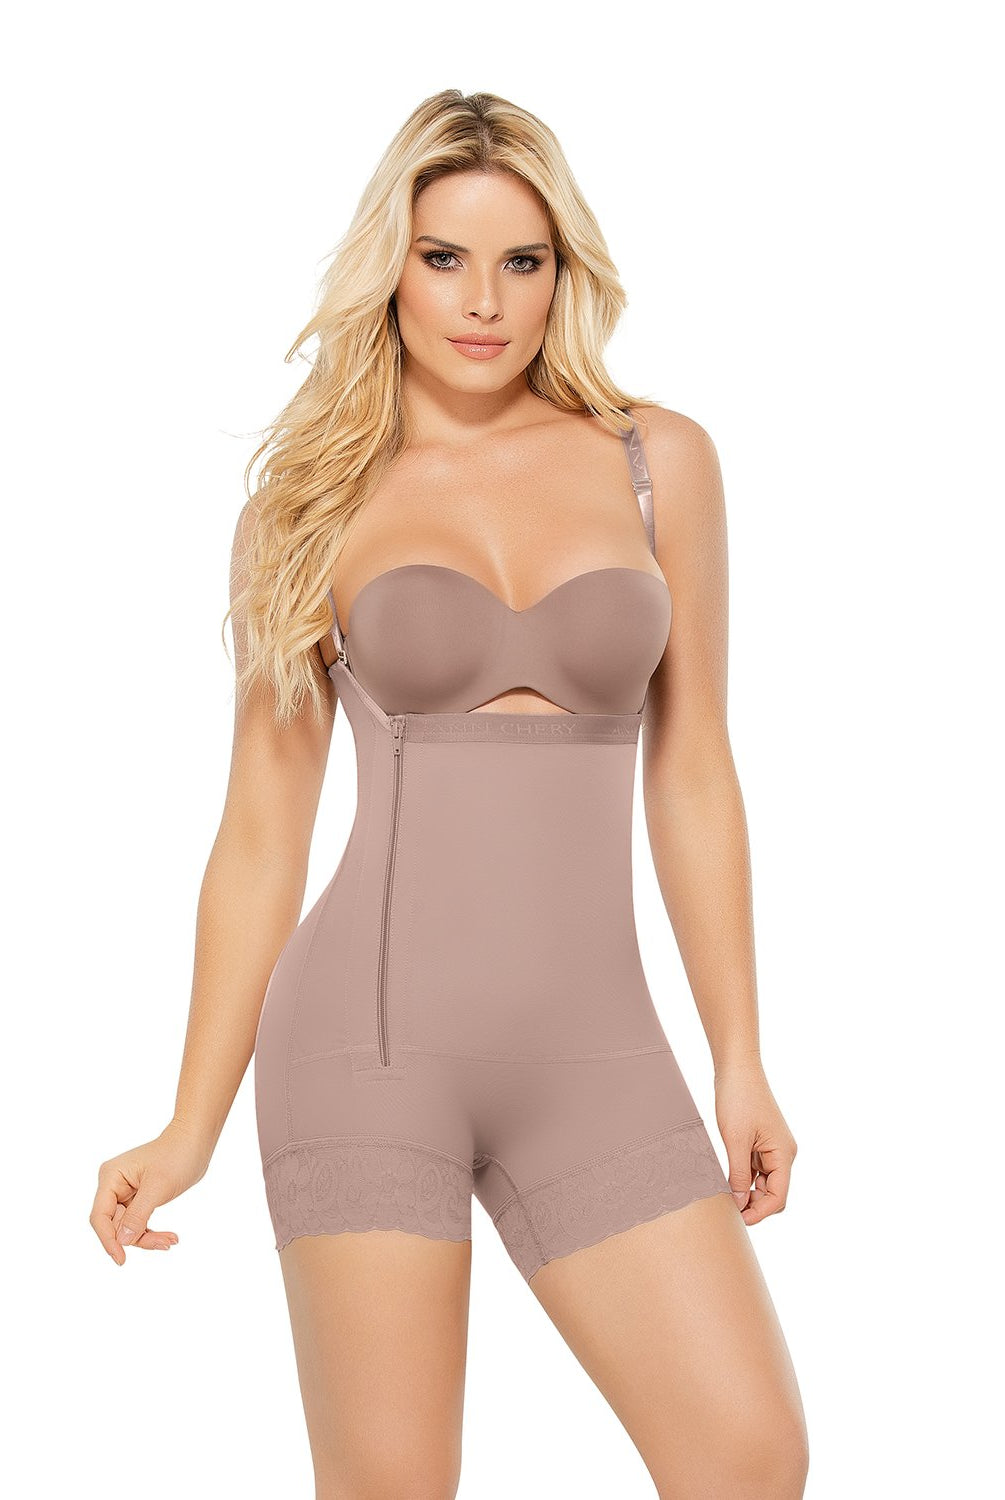 Ann Chery 5130 Post Surgery Bra Surgical Operatory Brassier Brown :  : Clothing, Shoes & Accessories